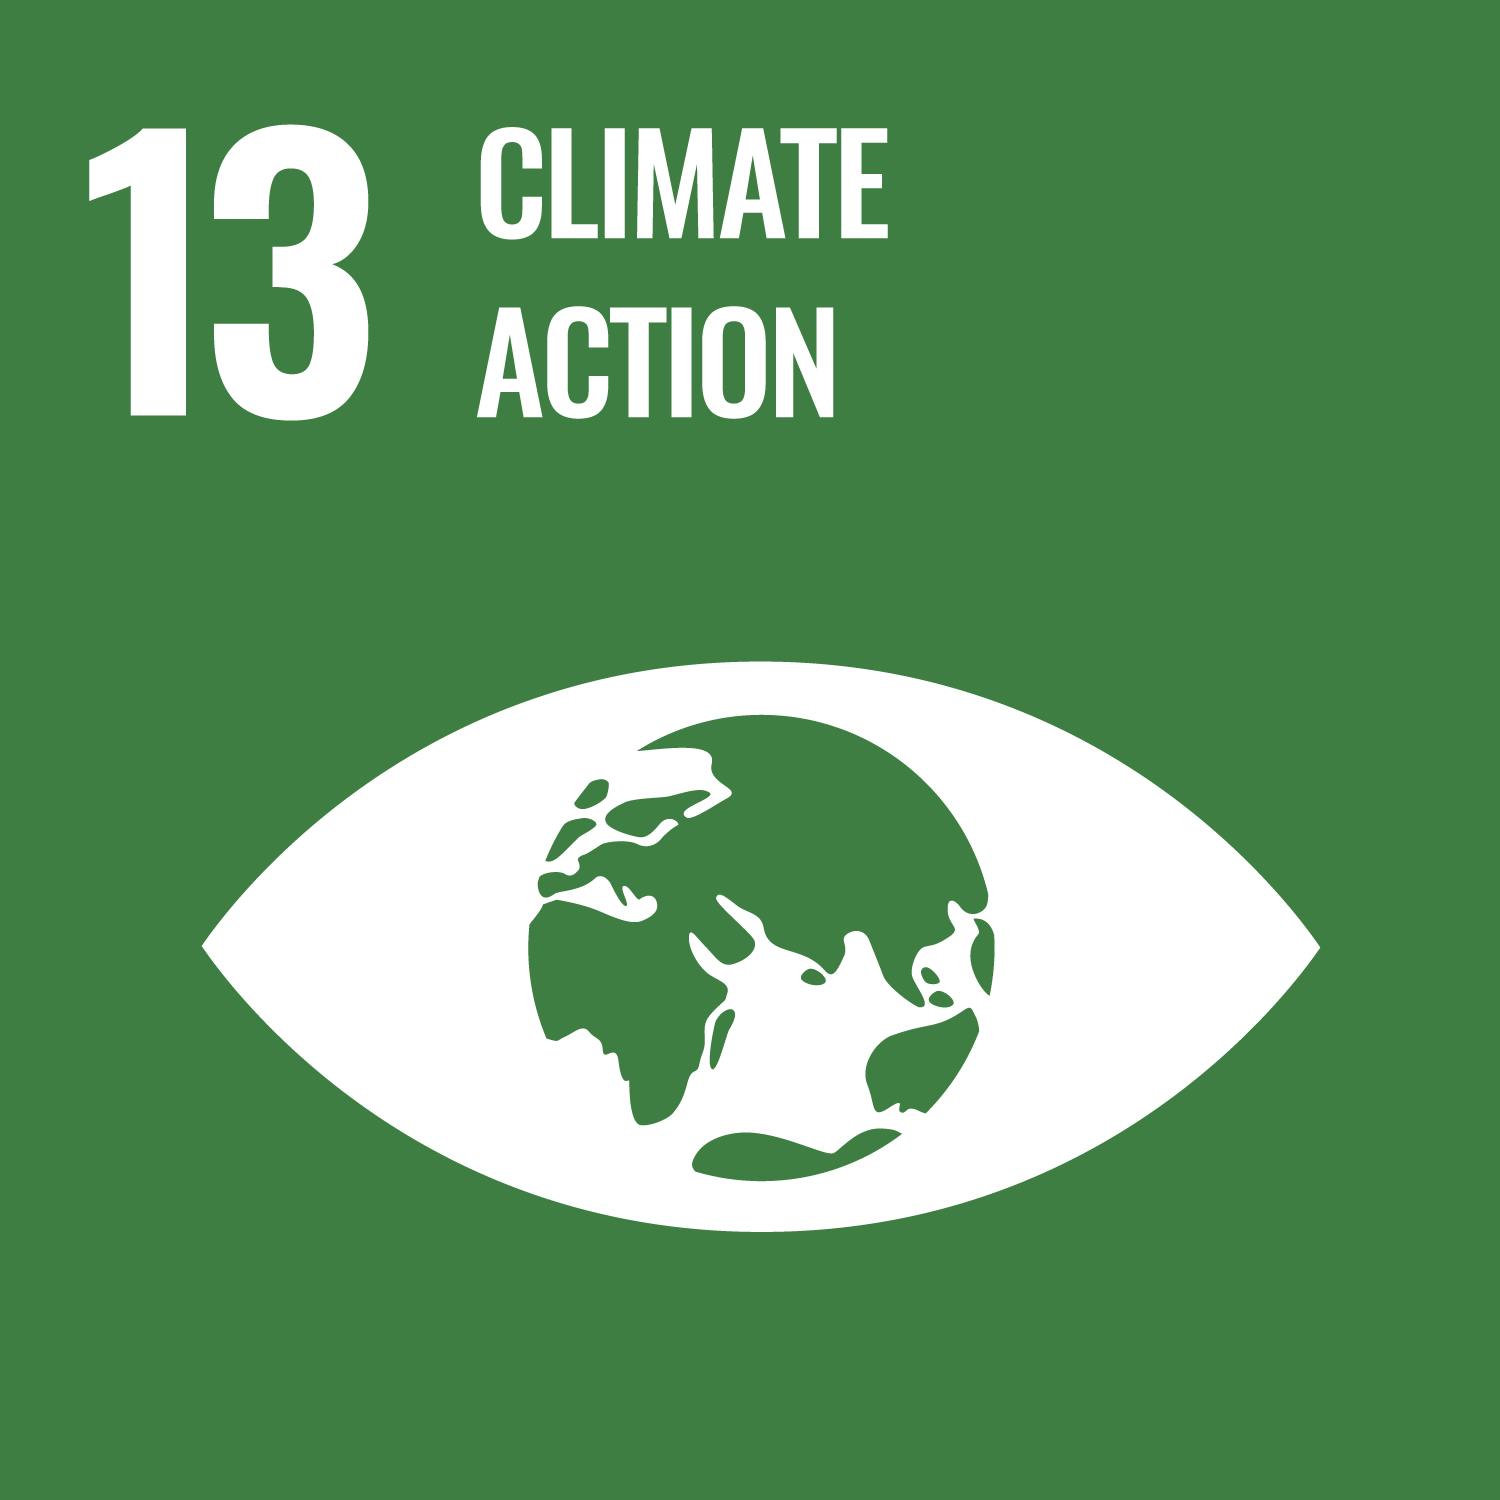 An icon of an eye is shown over a green background, and the center of the eye is planet Earth. The number 13 and the words Climate Action are in the top left corner of the image.